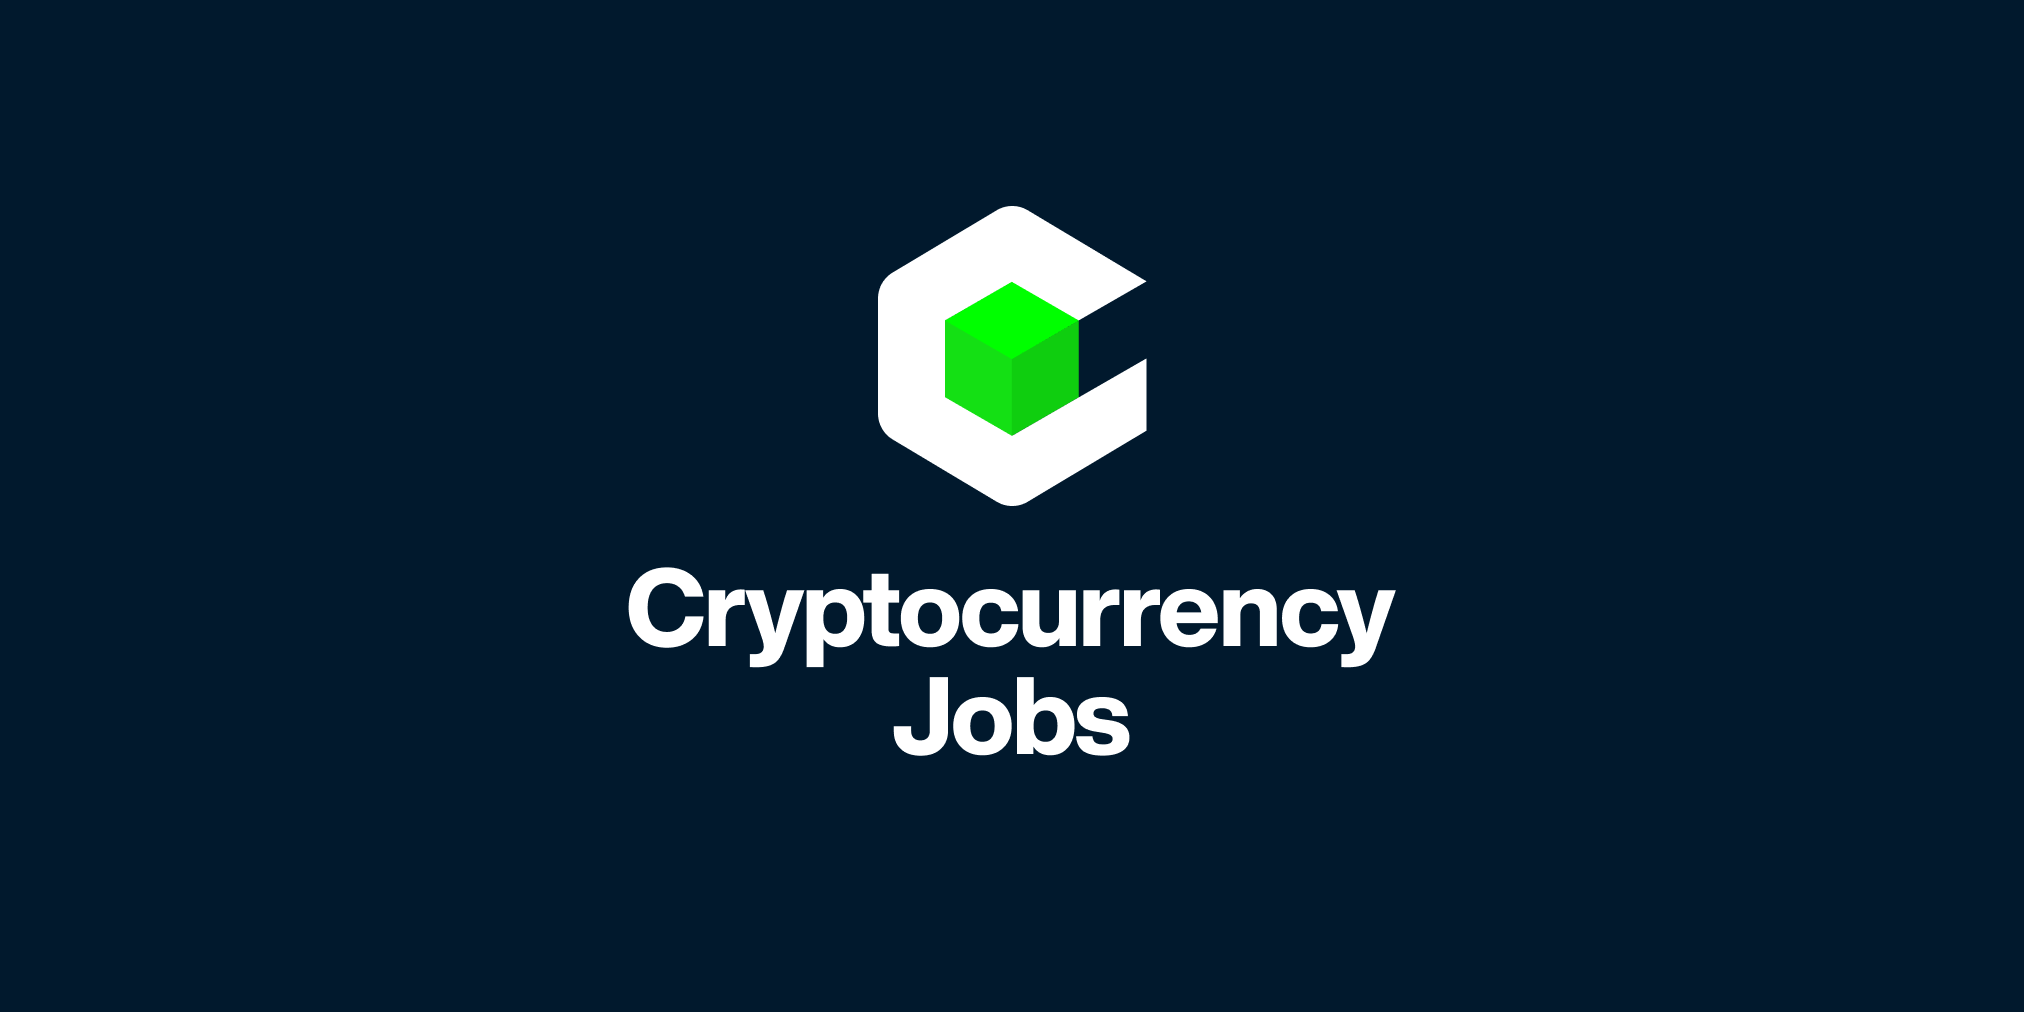 Cryptocurrency Jobs in the US - Cryptocurrency Jobs